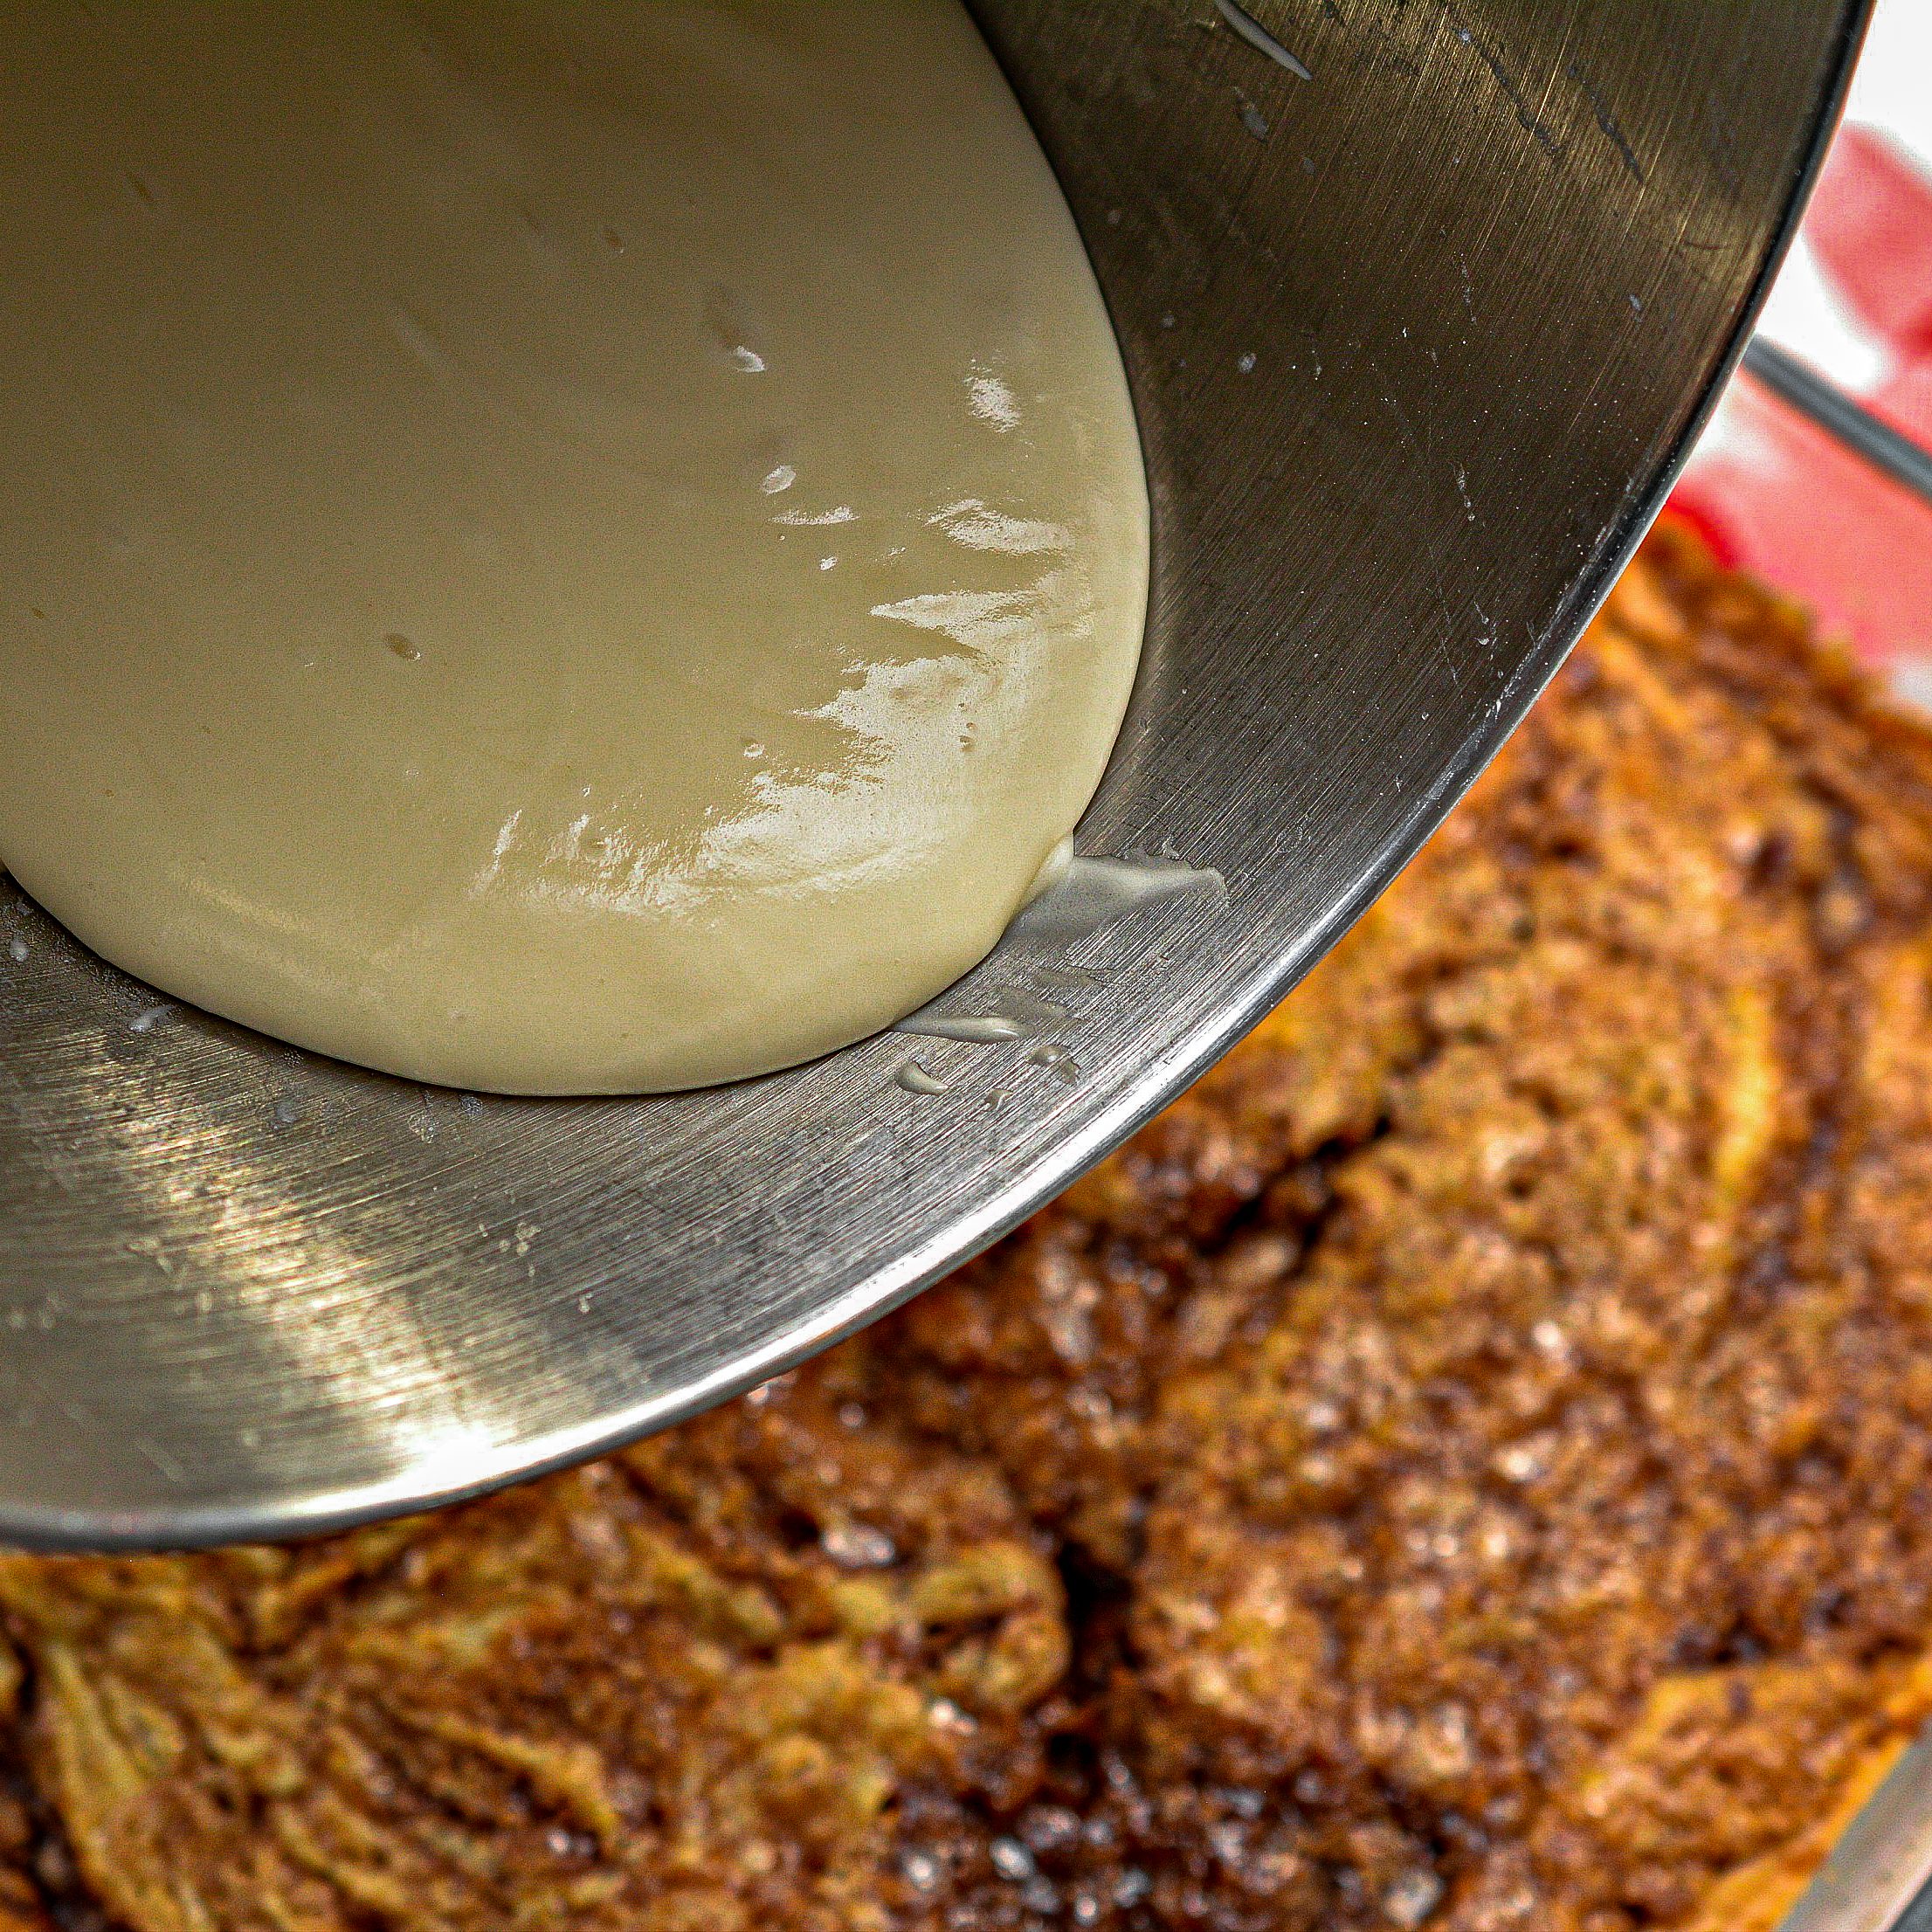 Mix the ingredients for the glaze together until smooth and pour over the warm cake.